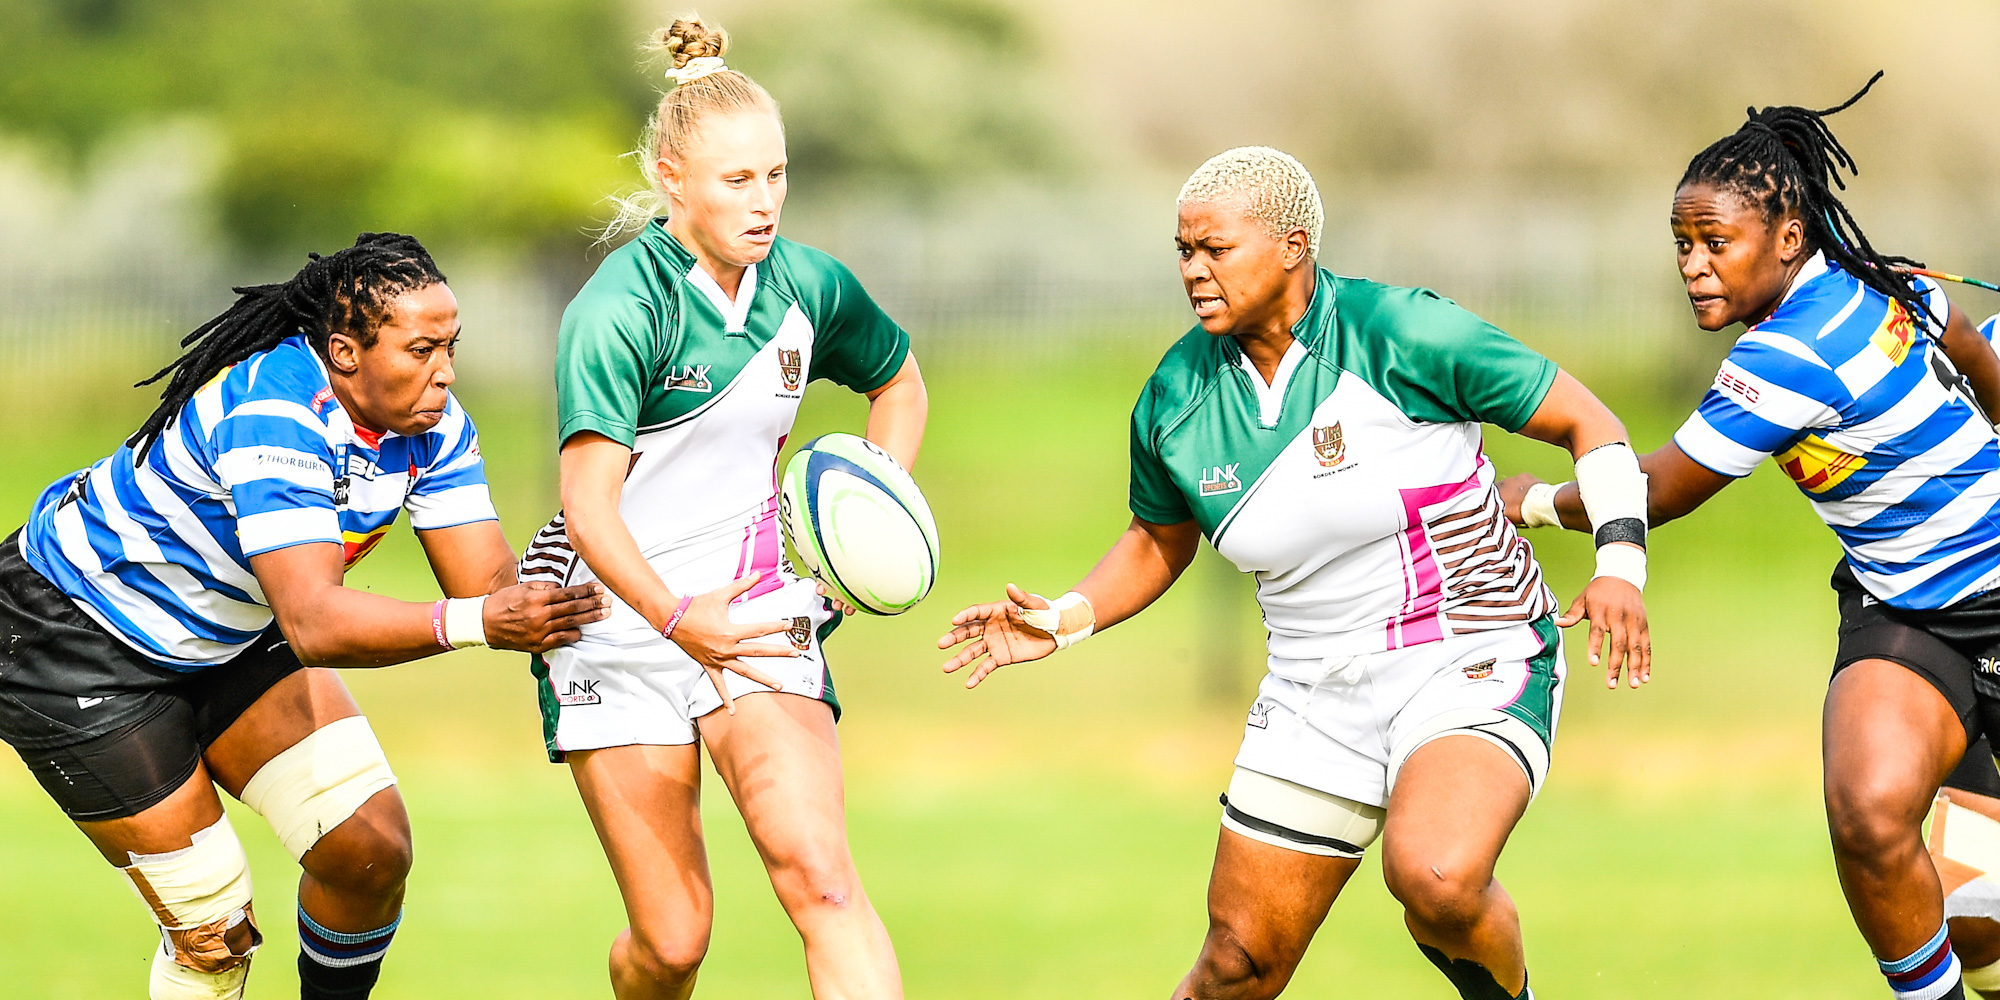 Four Springbok Women in action in the Women's Premier Division Final: Nolusindiso Booi tries to tackle Eloise Webb, with Aphiwe Ngwevu in support for the Border Ladies, and Zintle Mpupha (far right) also on defence for DHL WP.